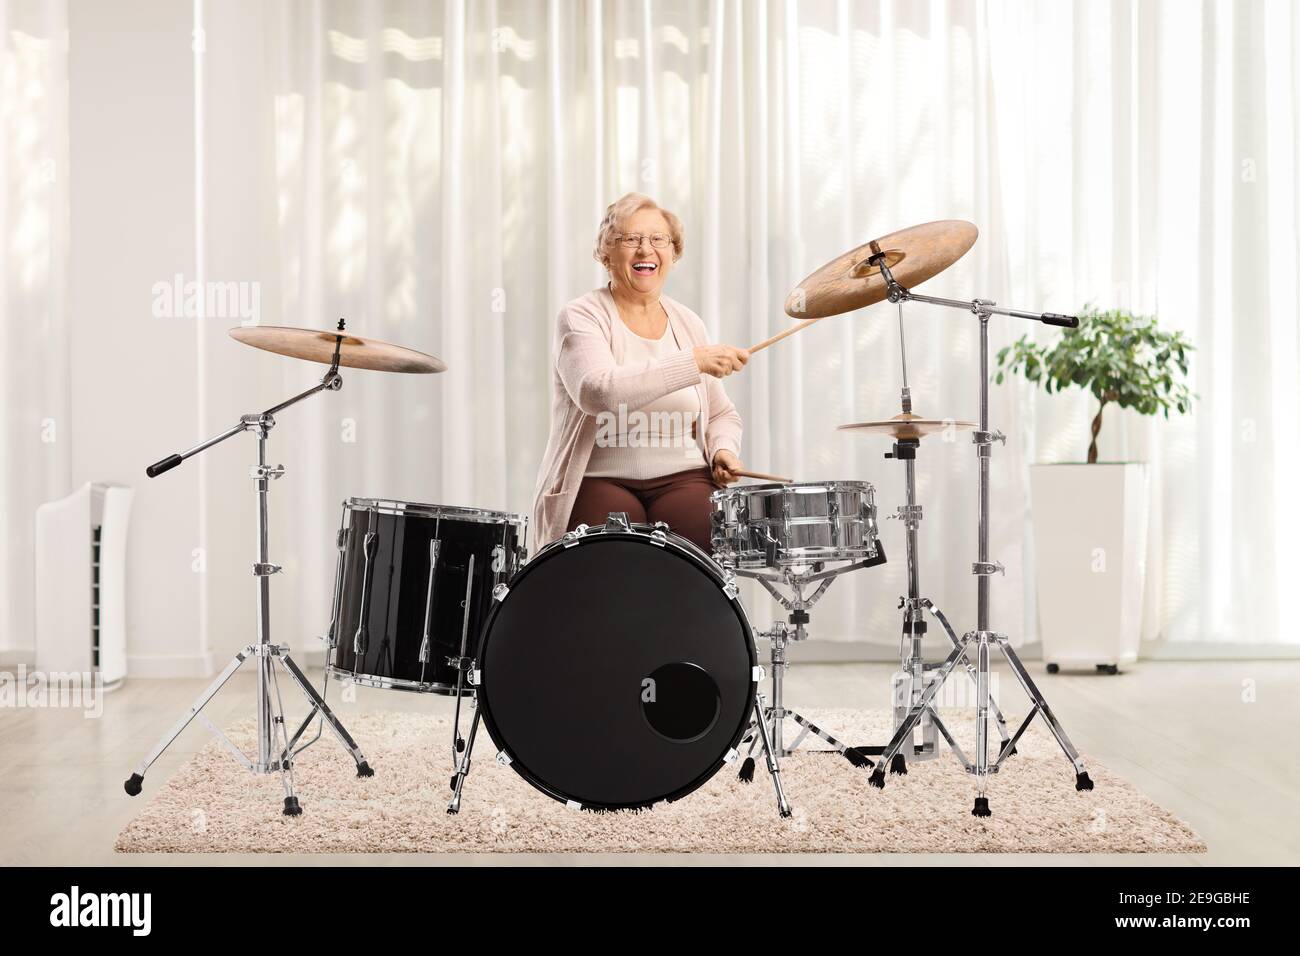 Cheerful elderly woman playing drums at home Stock Photo